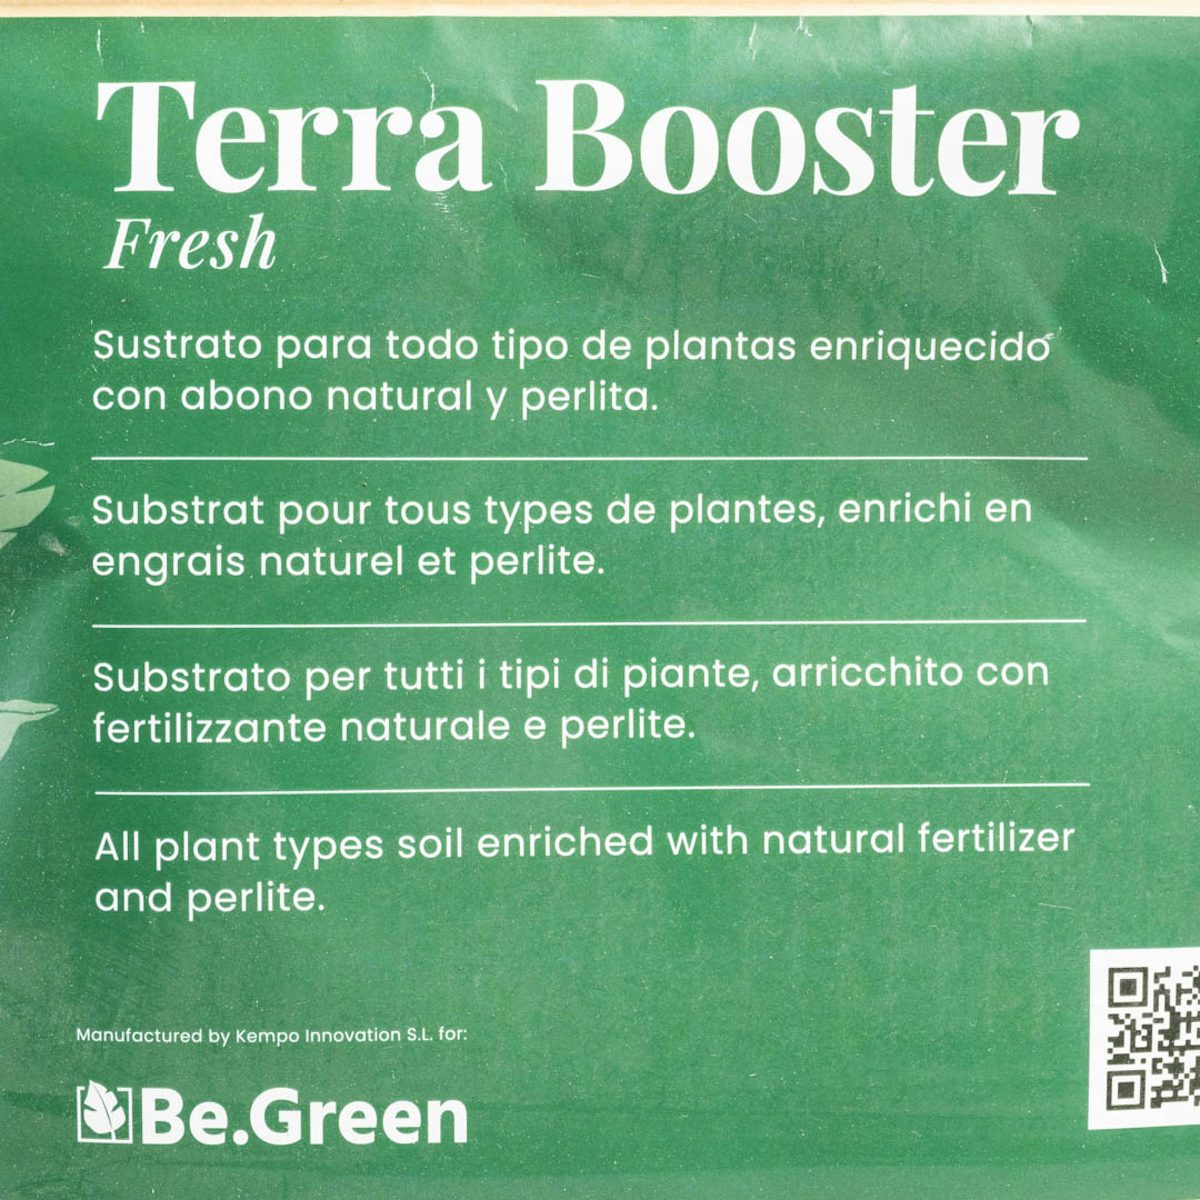 Terra Booster Substrate